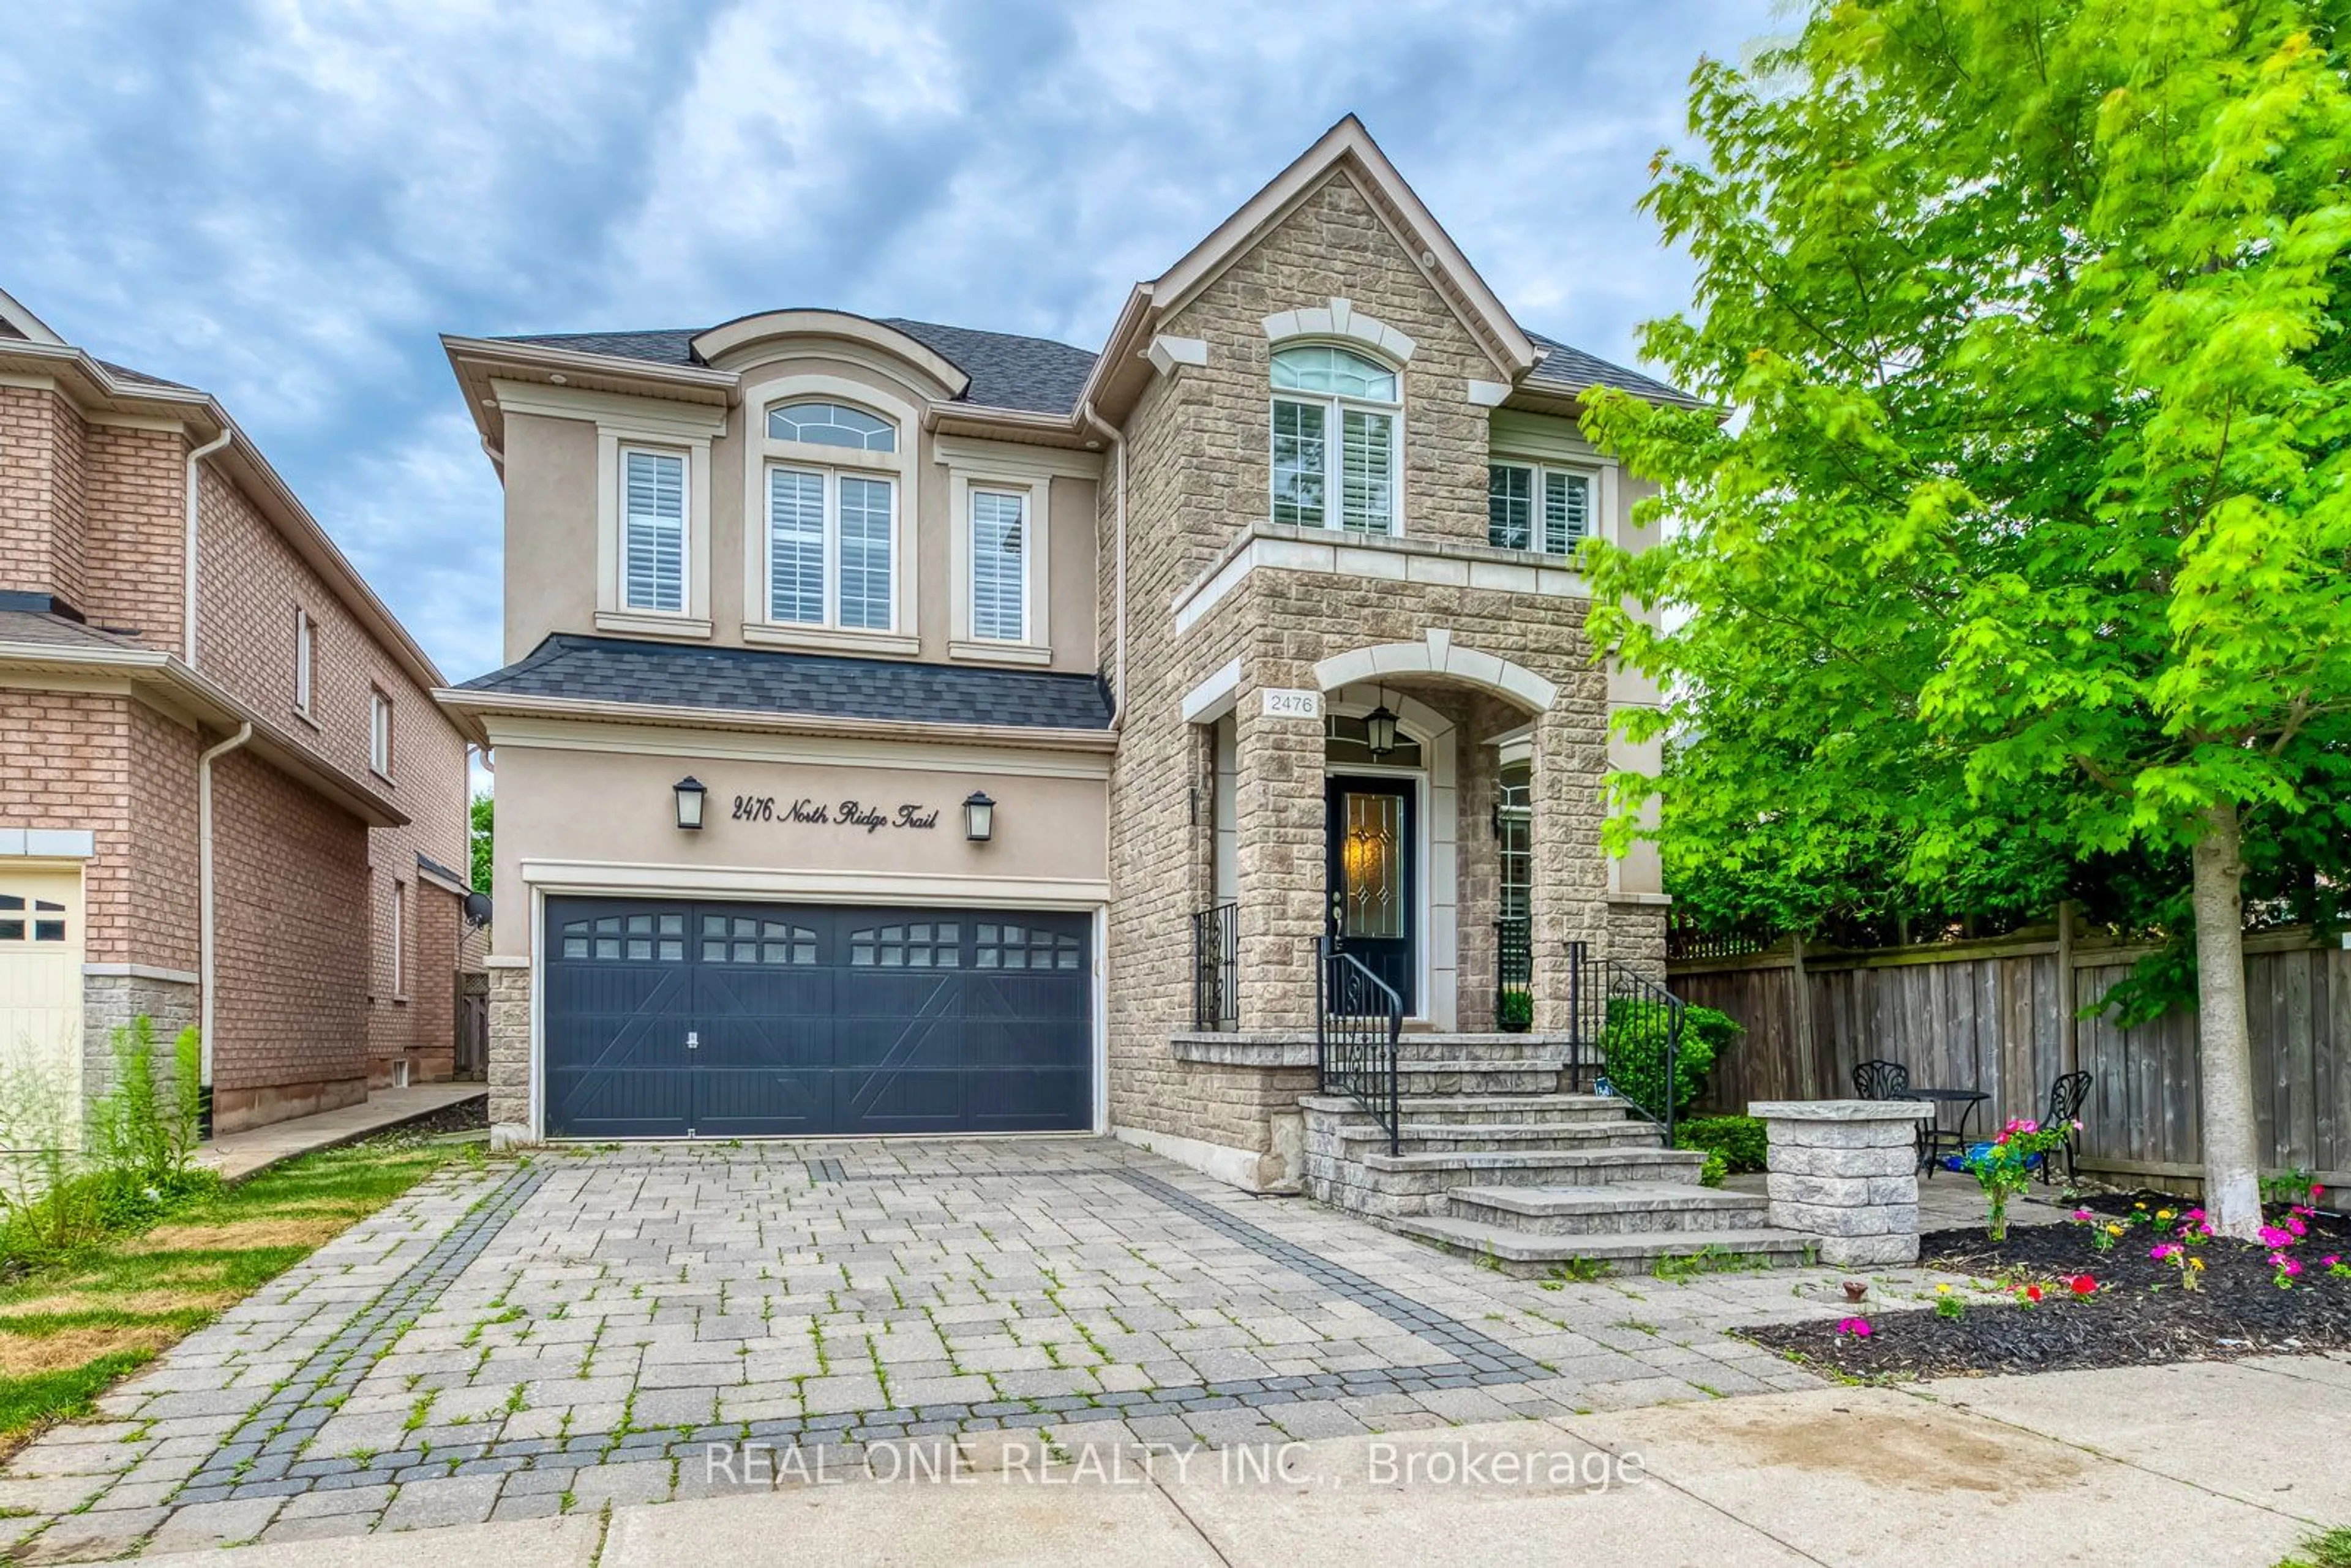 Home with brick exterior material for 2476 North Ridge Tr, Oakville Ontario L6H 7N6